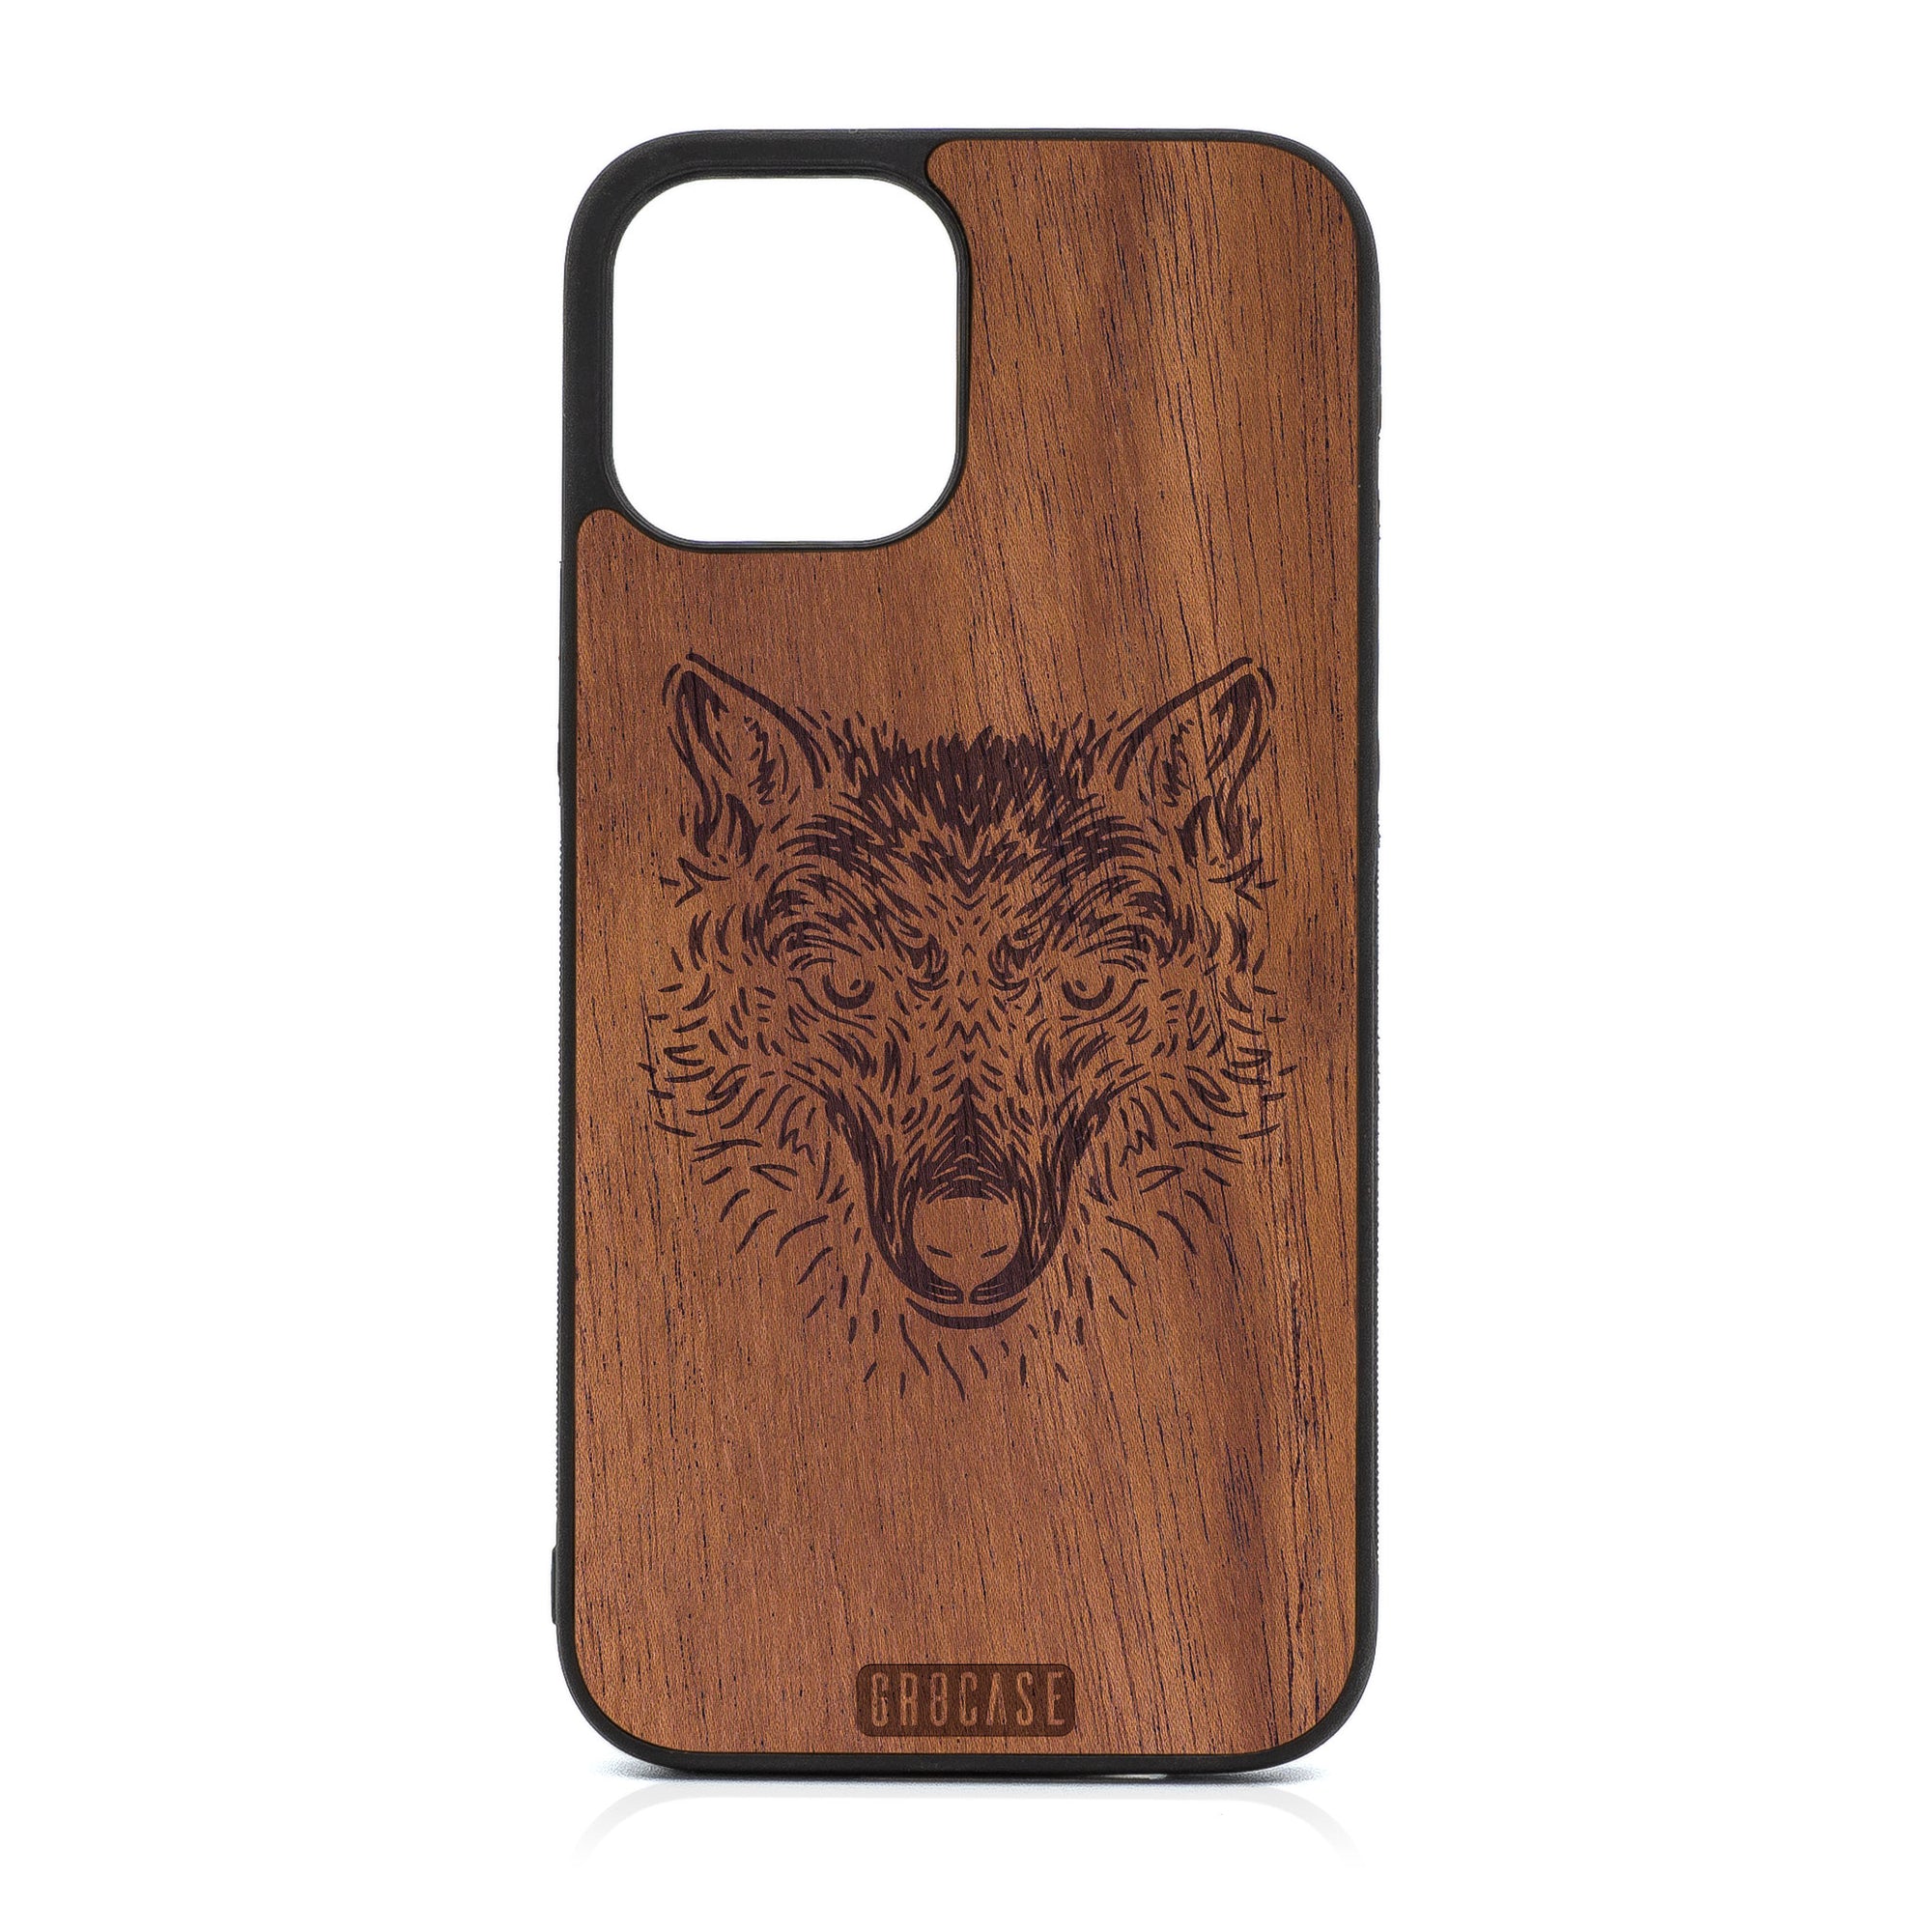 Furry Wolf Design Wood Case For iPhone 12 Pro Max